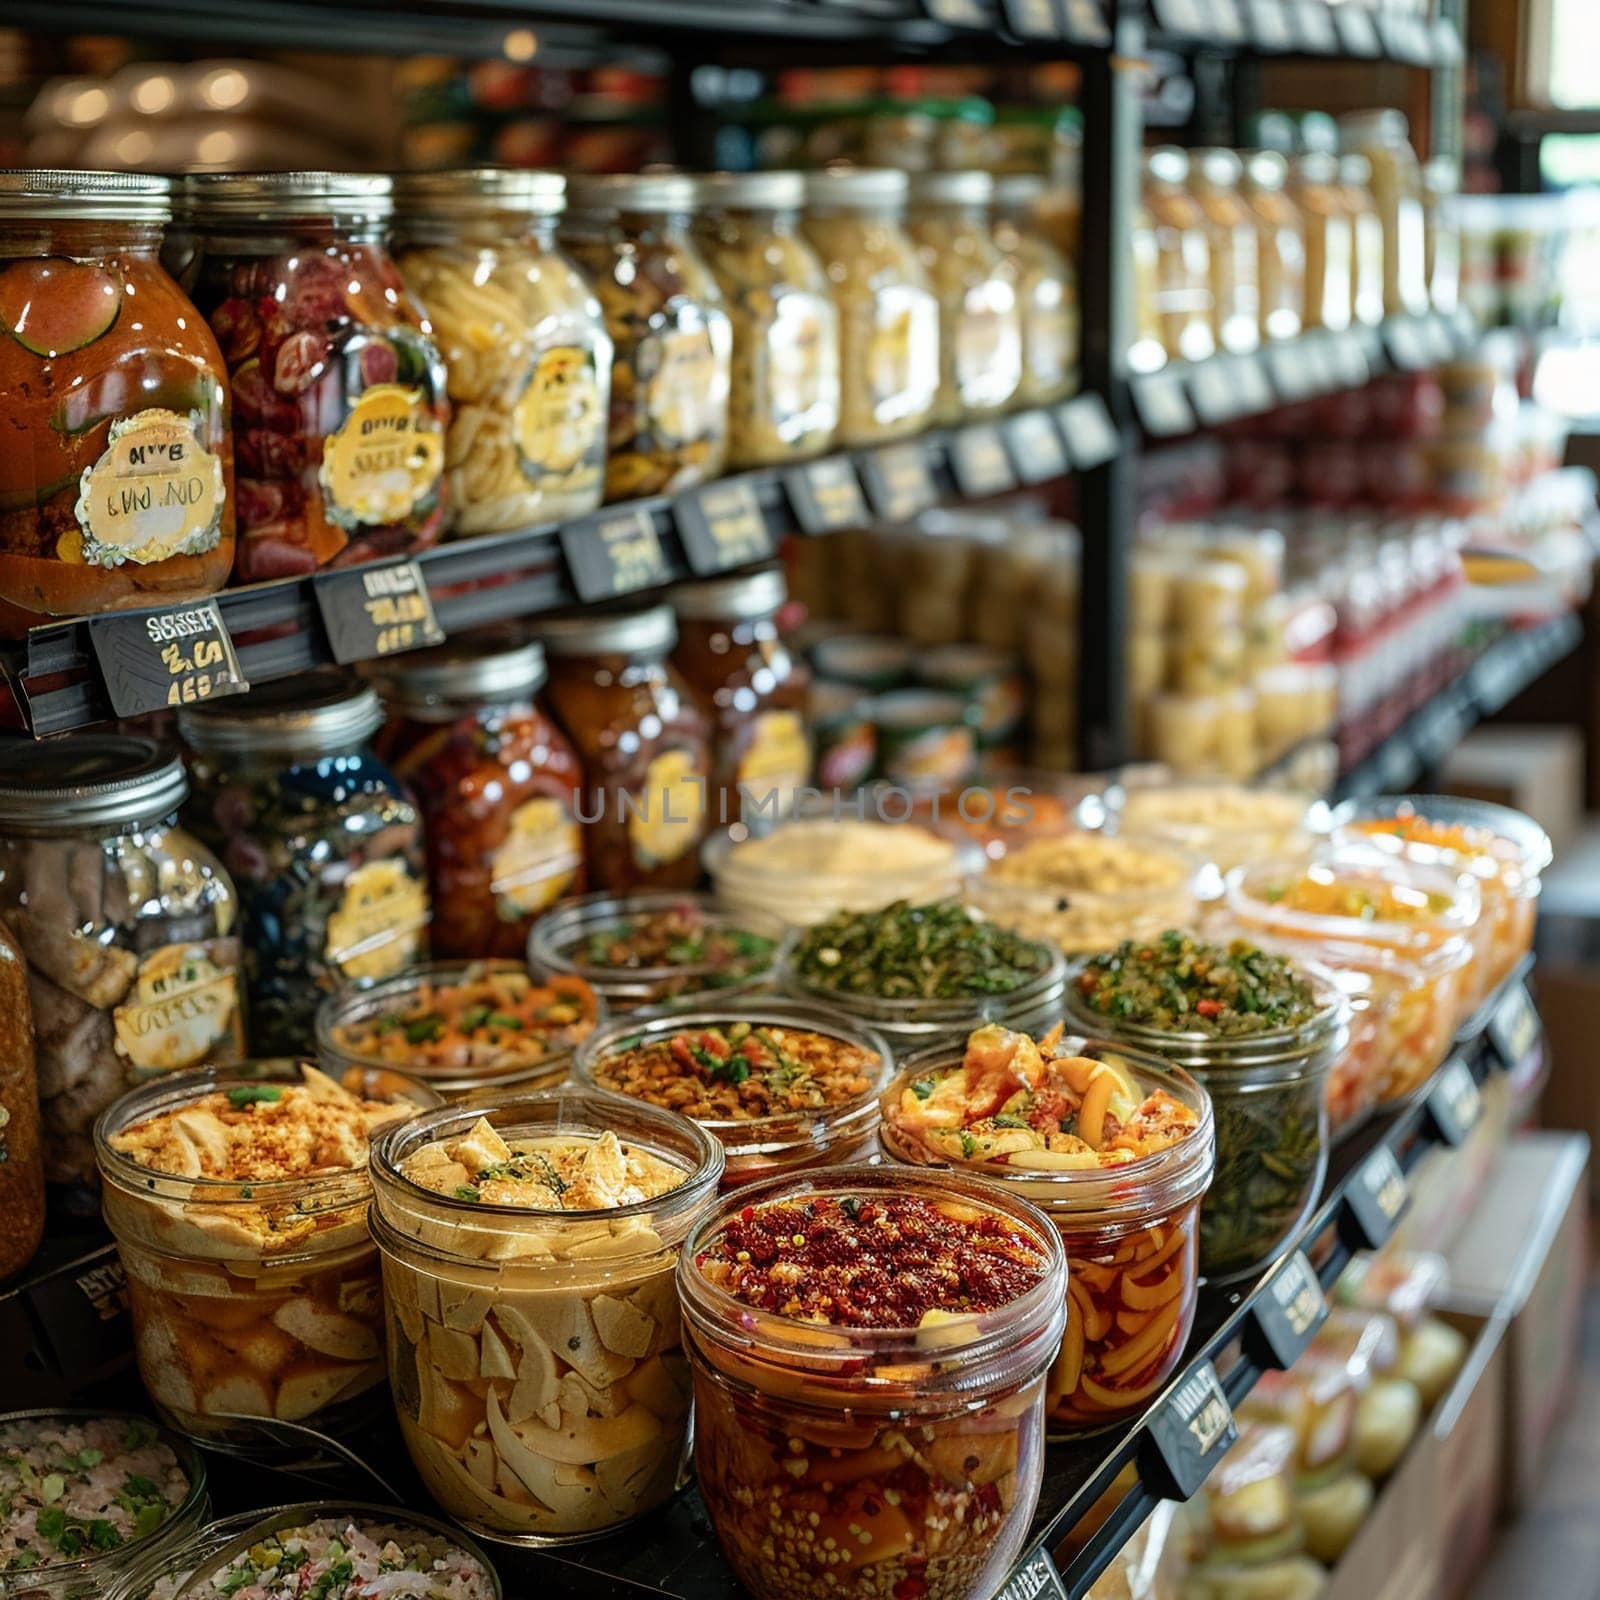 Cultural Grocery Store Shares World Flavors in Business of Ethnic Foods, Labels and exotic ingredients offer a narrative of diversity and taste in the ethnic grocery business.